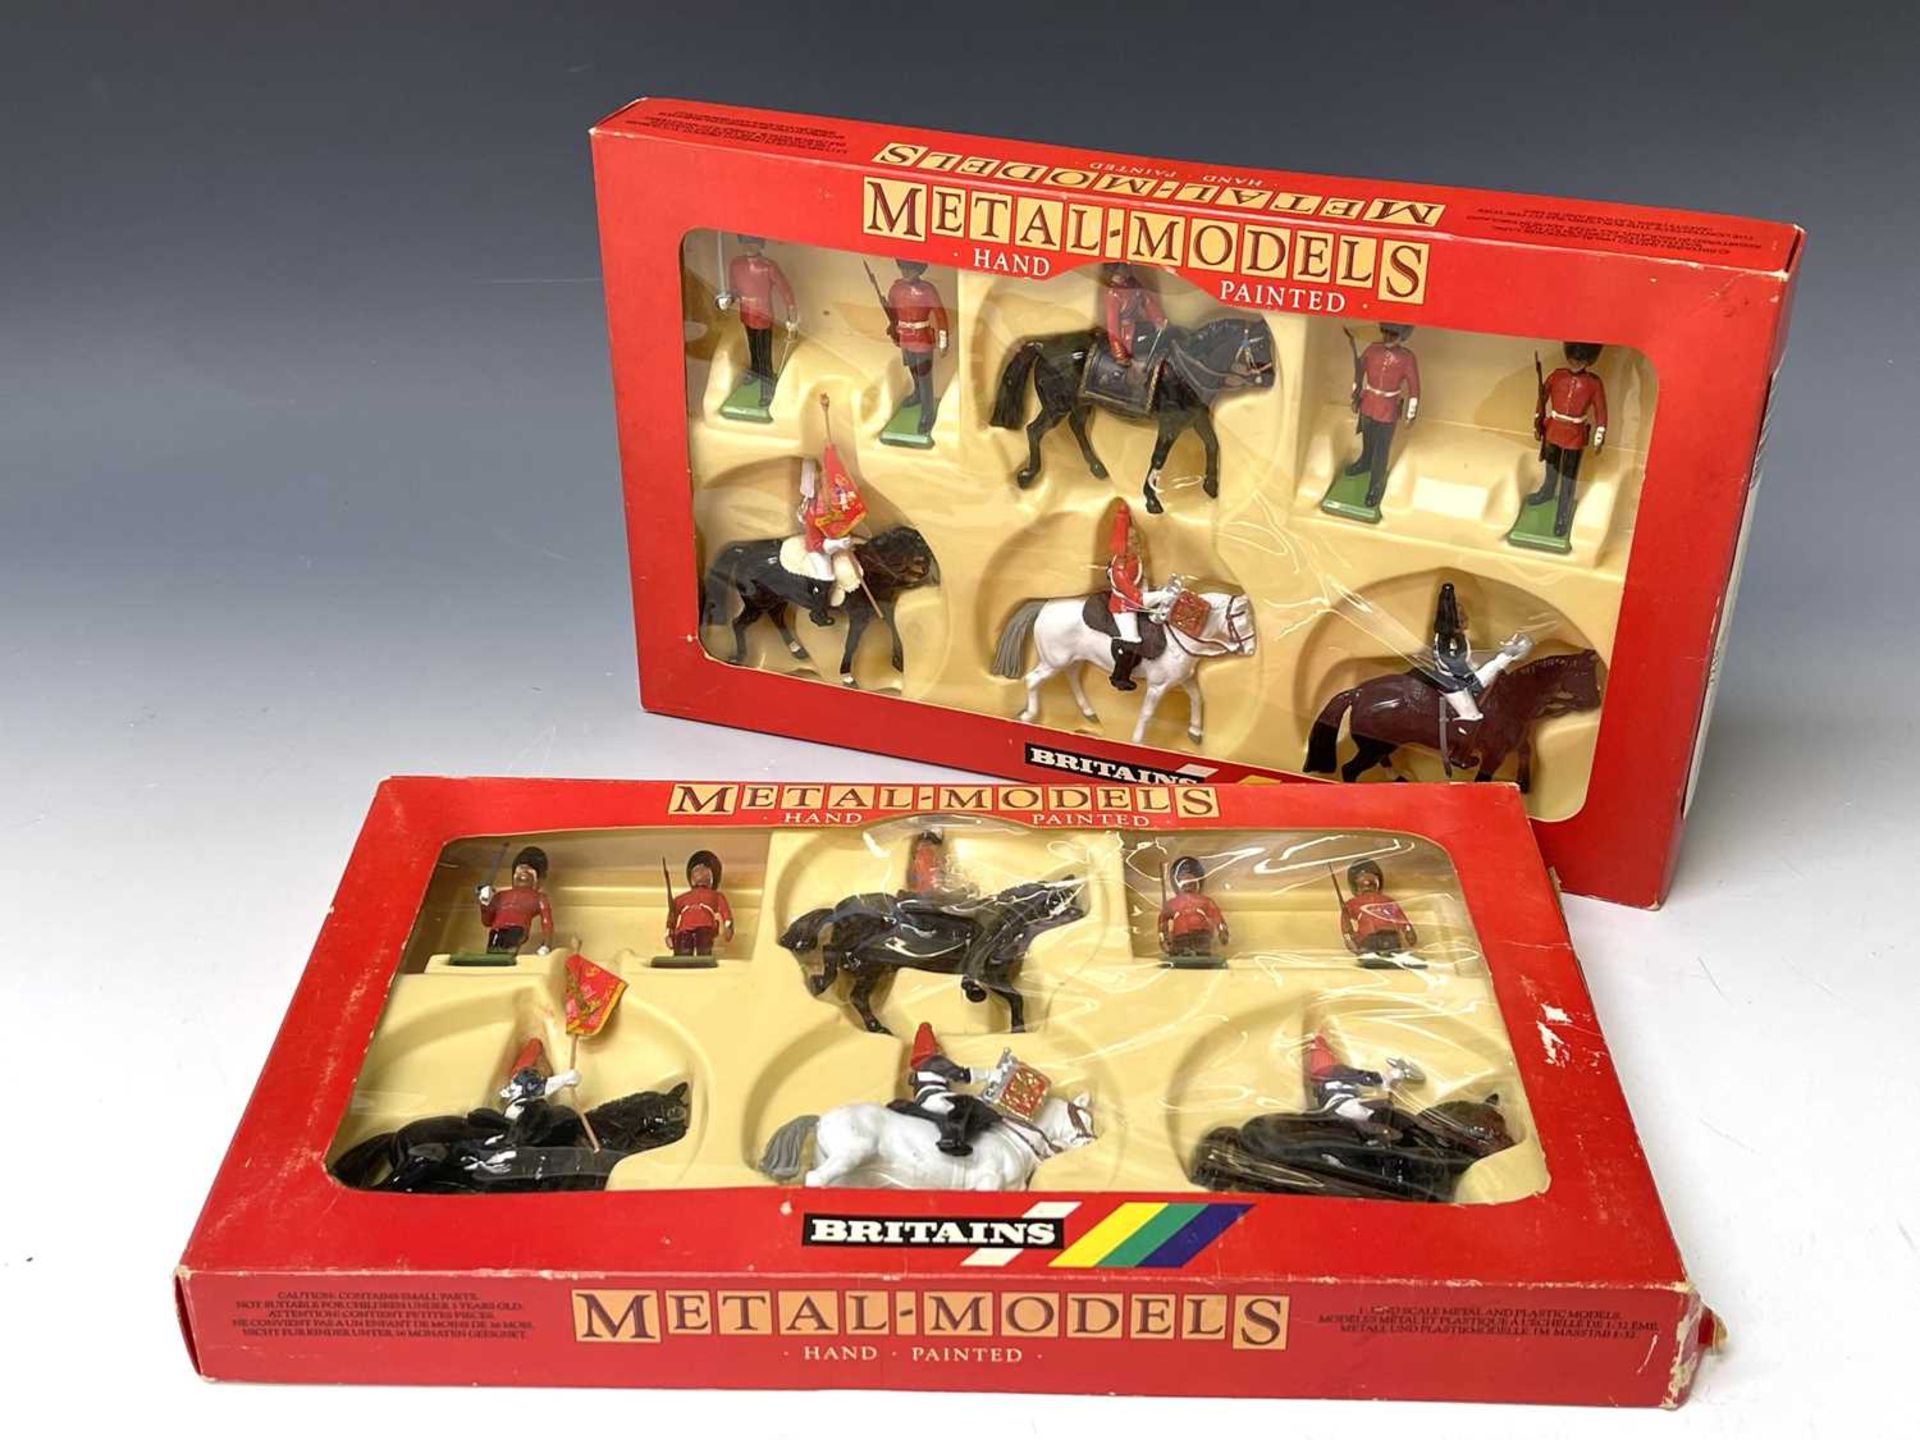 Britains - Ceremonial Sets 7218 and 7219 - both boxed. 16 figures in total, including 8 mounted.